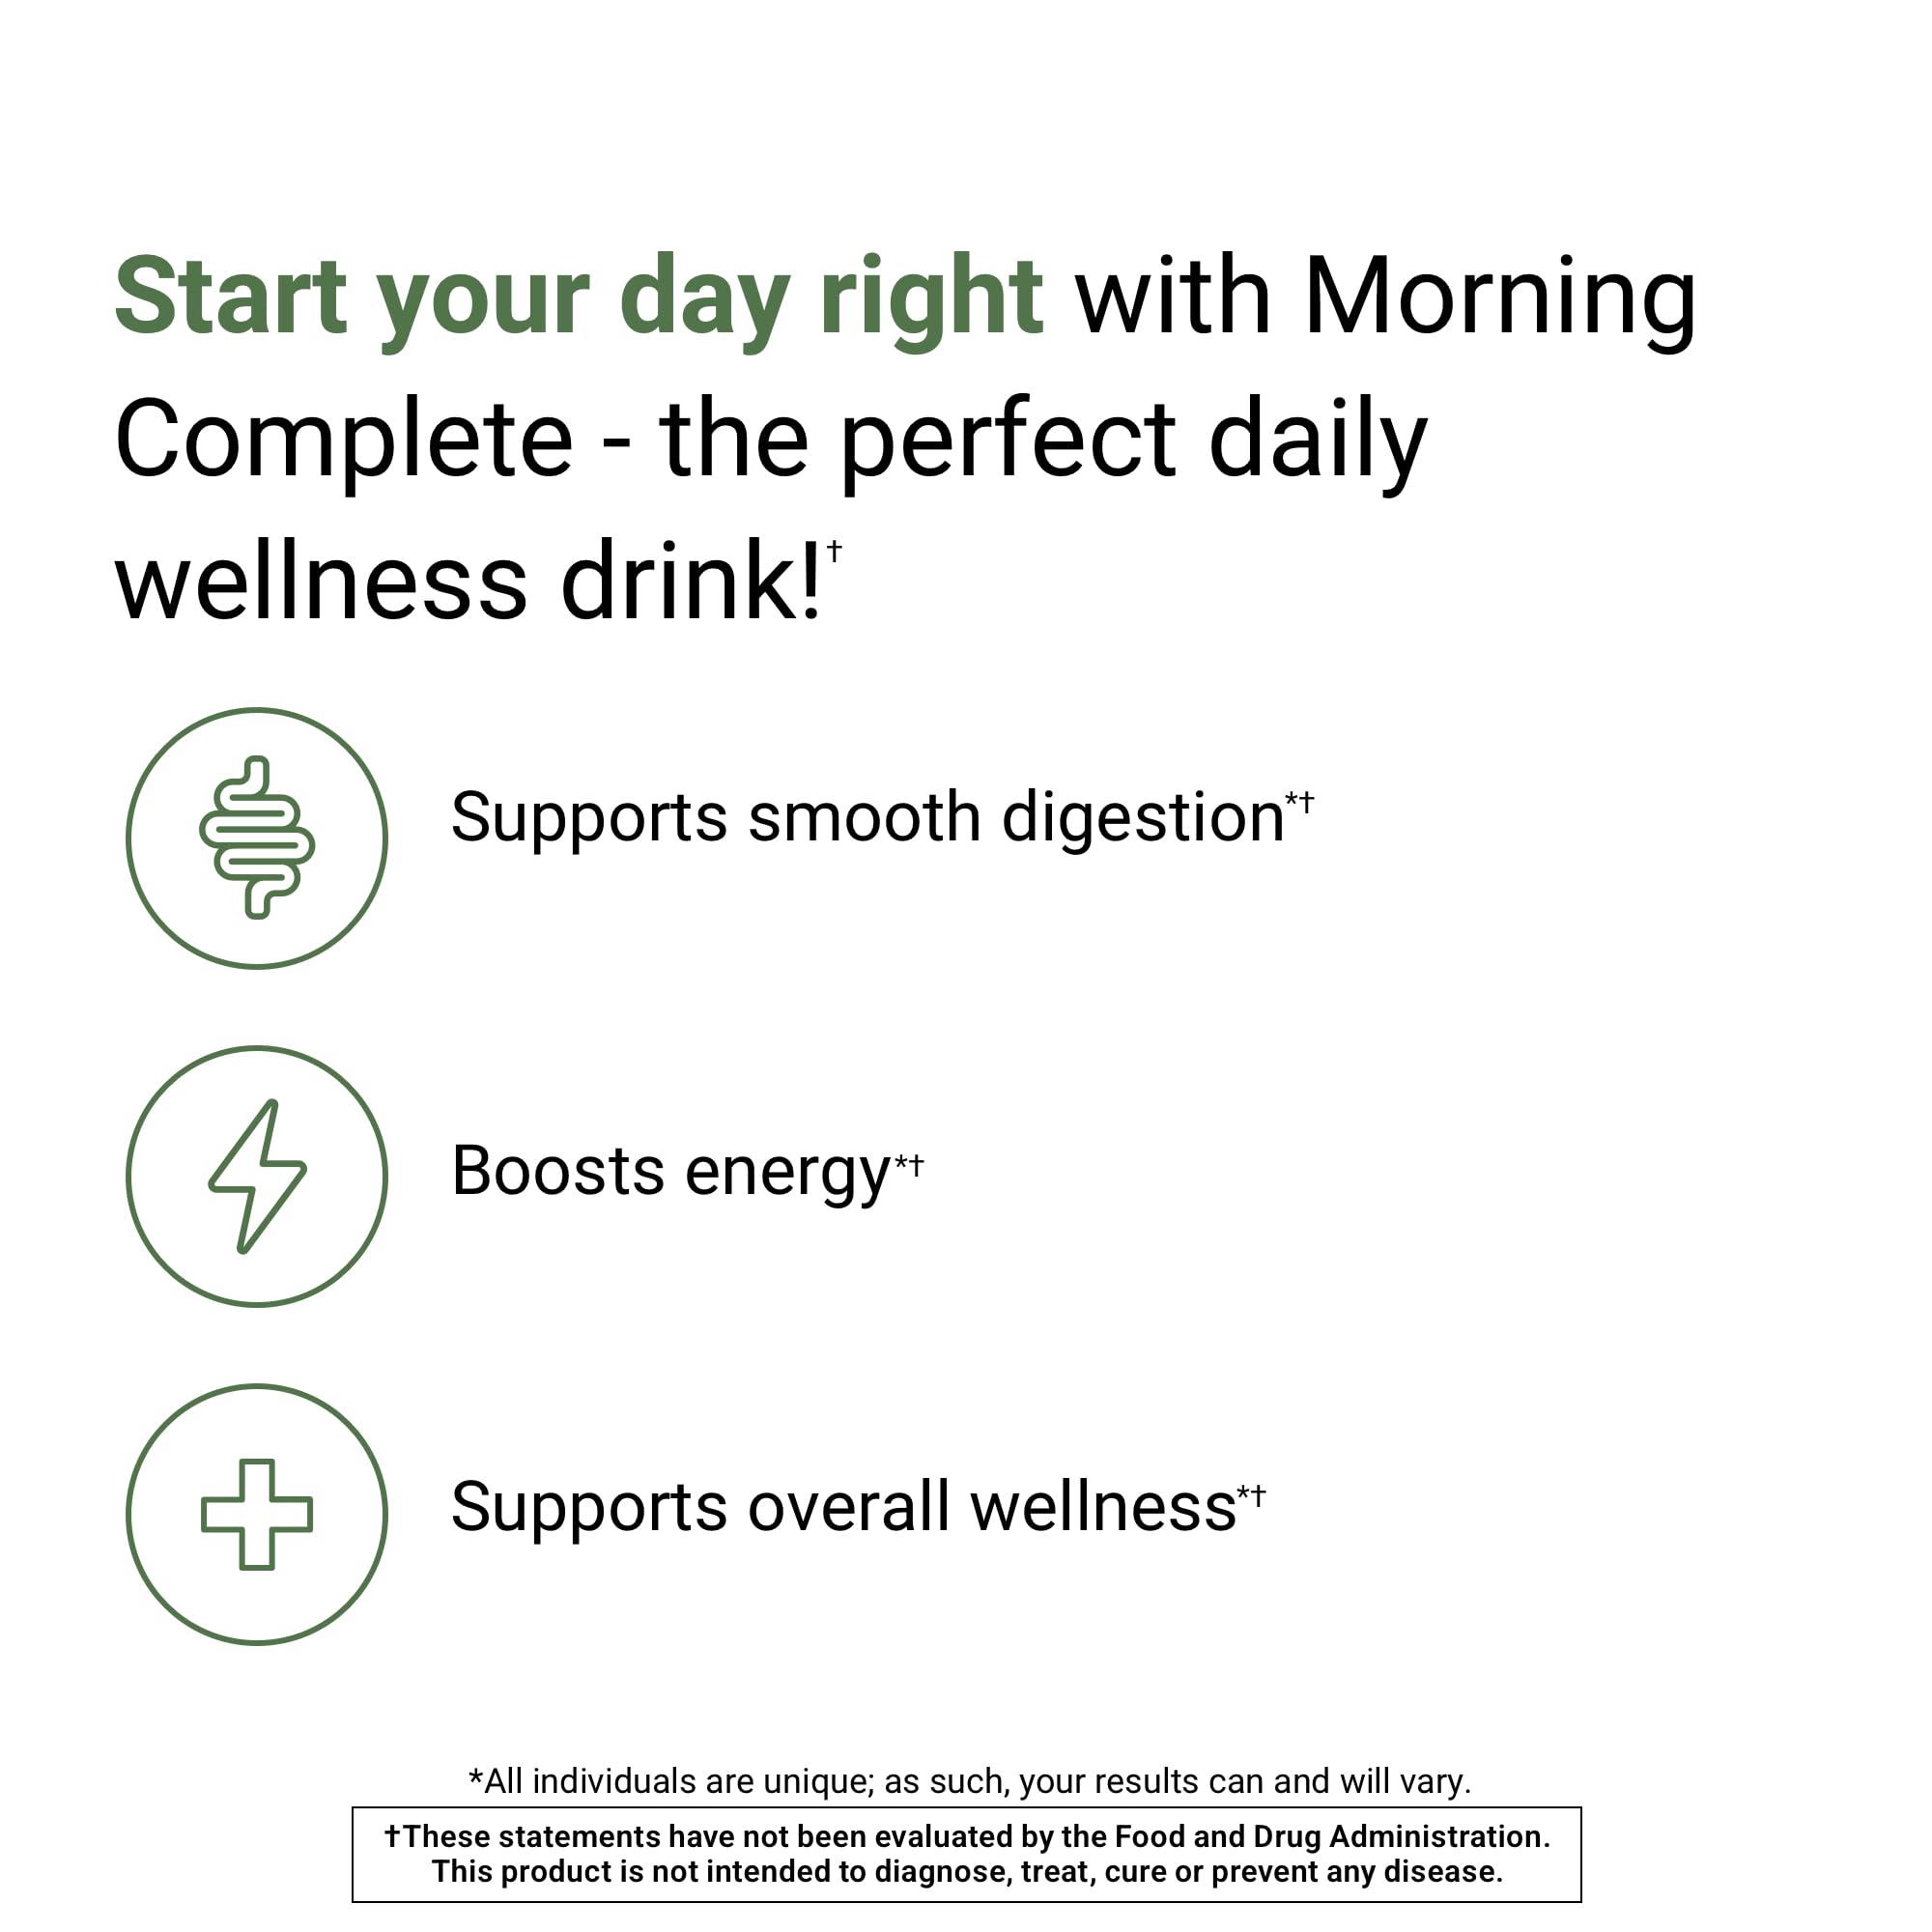 ACTIVATEDYOU Morning Complete Daily Wellness Drink Powder with 10 Billion CFUs, Prebiotics, Probiotics and Green Superfoods, 30 Servings, Apple Cinnamon Flavor